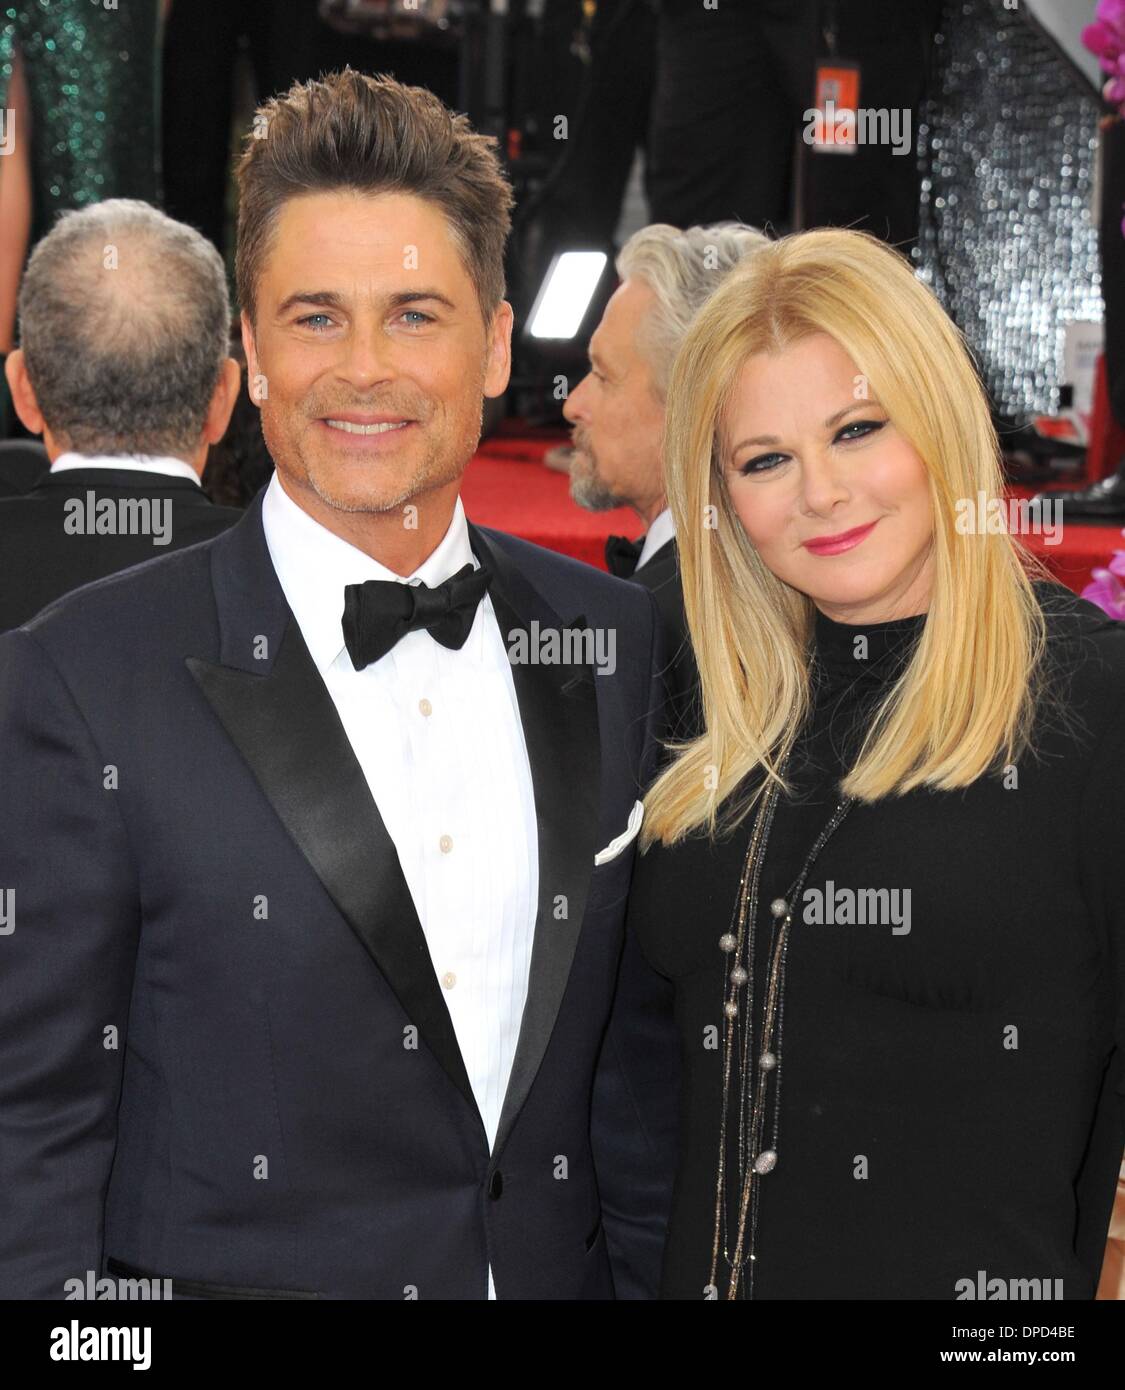 Beverly Hills, California, USA. 12th Jan, 2014. Rob Lowe; Sheryl Berkoff at arrivals for 71st Golden Globes Awards - Arrivals 4, The Beverly Hilton Hotel, Beverly Hills, CA January 12, 2014. Credit:  Linda Wheeler/Everett Collection/Alamy Live News Stock Photo